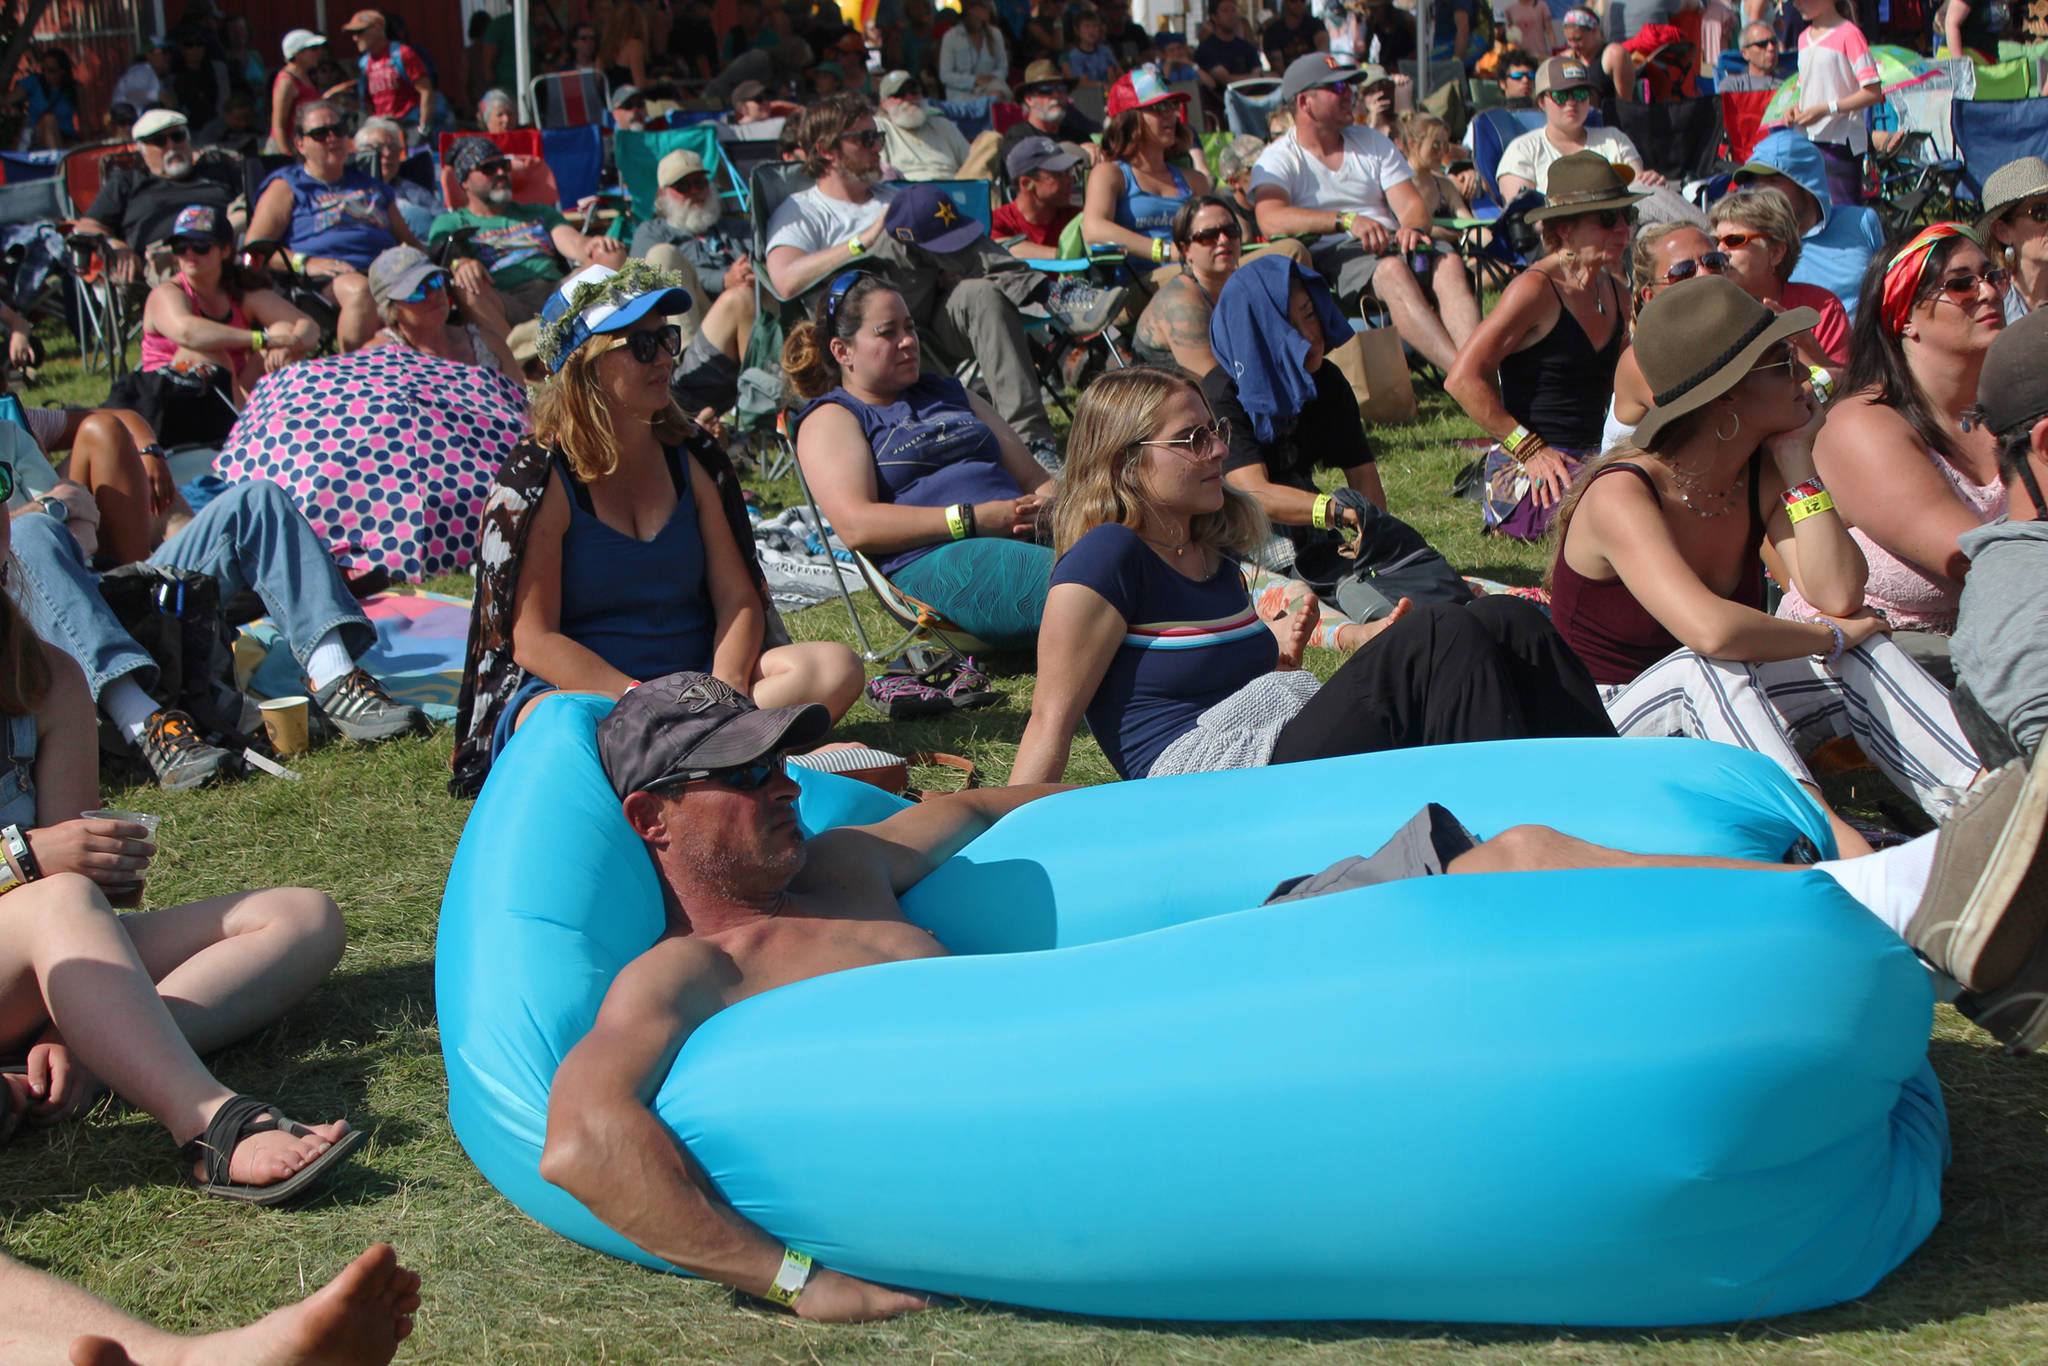 A festival goer reclines in the grass while watching a performance at the Ocean Stage on Saturday, Aug. 4, 2018 at Salmonfest in Ninilchik, Alaska. (Photo by Megan Pacer/Homer News)